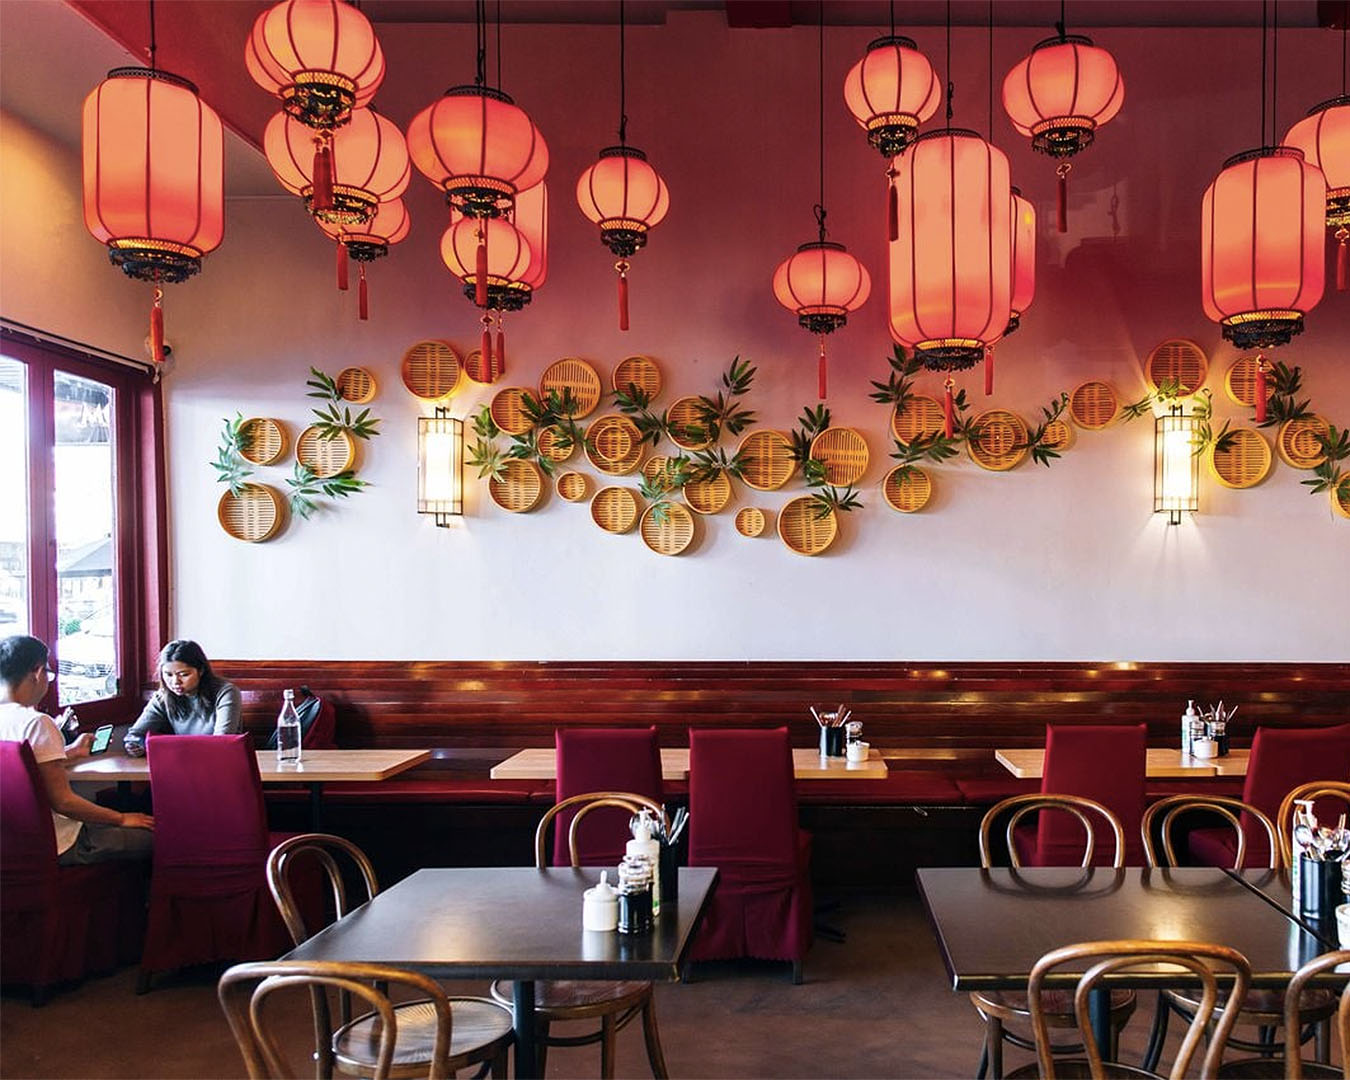 The interior at The Chilli House shows gorgeous red lamps and seats.